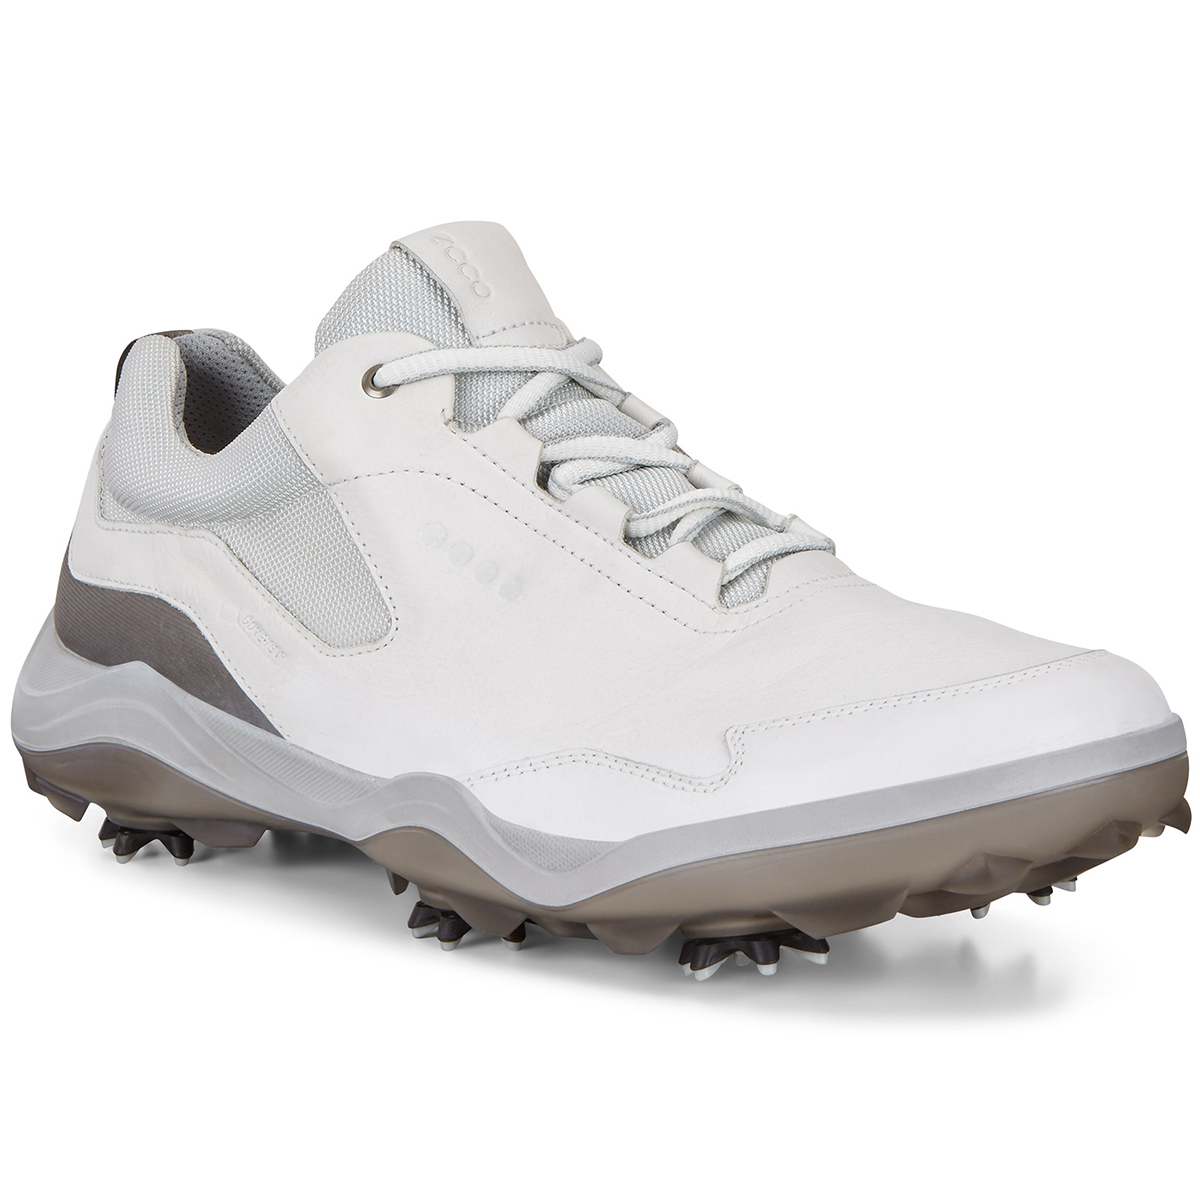 ECCO Golf Strike Racer Yak Shoes from american golf